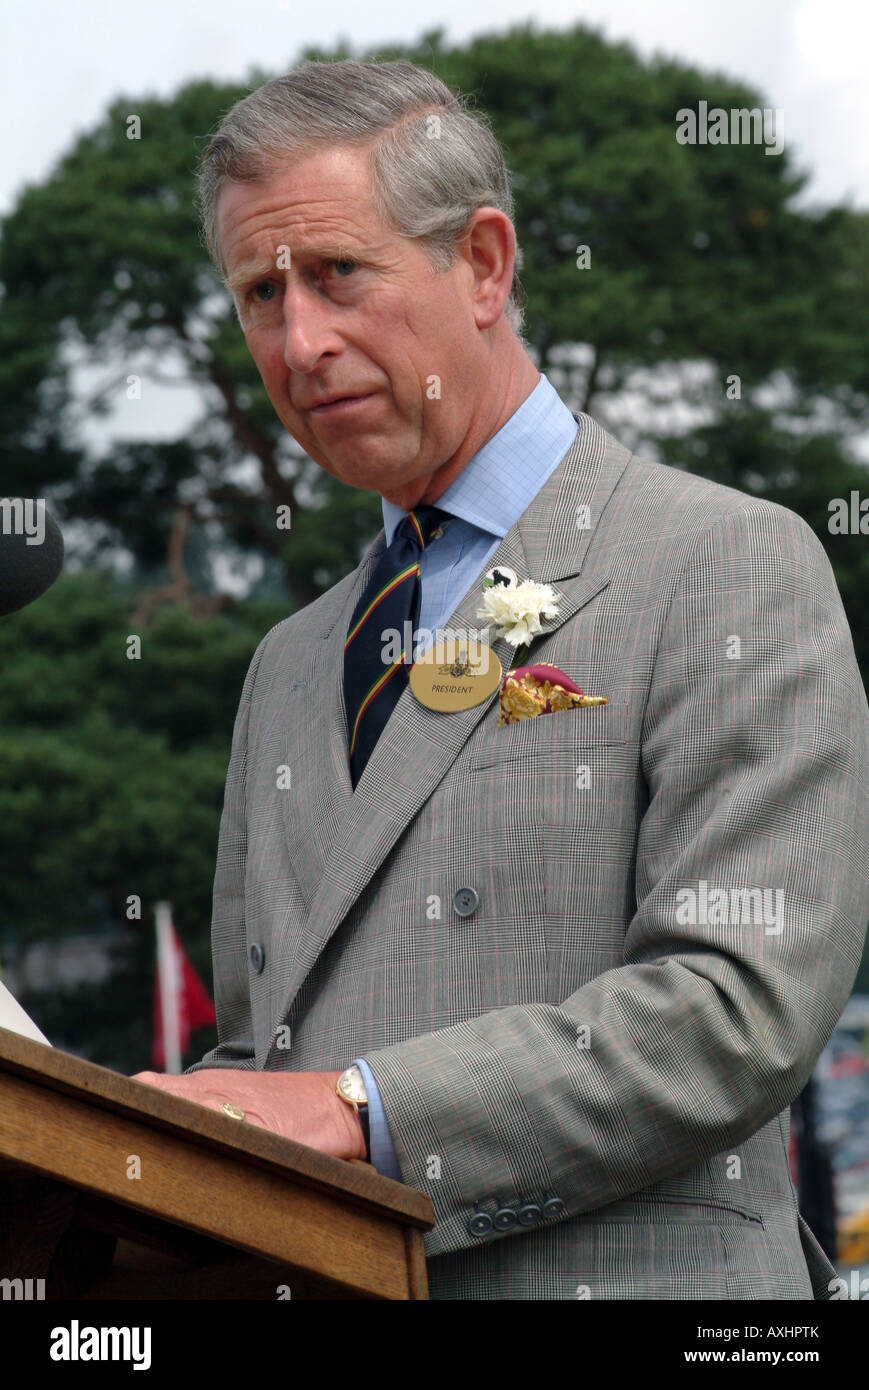 Portrait shot of HRH Charles Prince of Wales giving speech Stock Photo